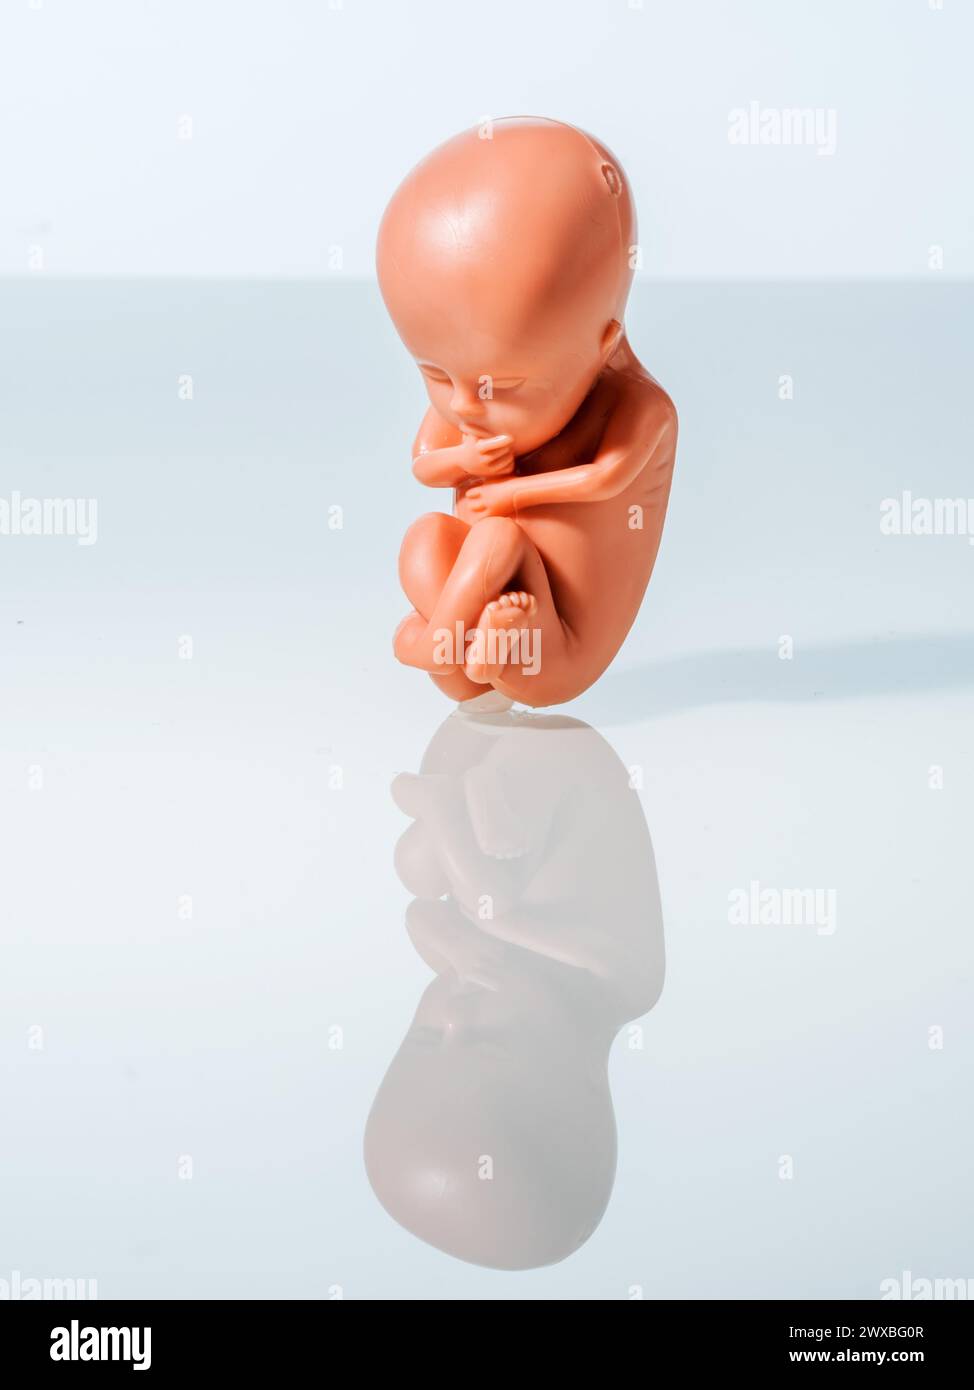 A 12-week-old Emybro made of plastic. Model for pregnancy, abortion and contraception. Protection of unborn life Stock Photo